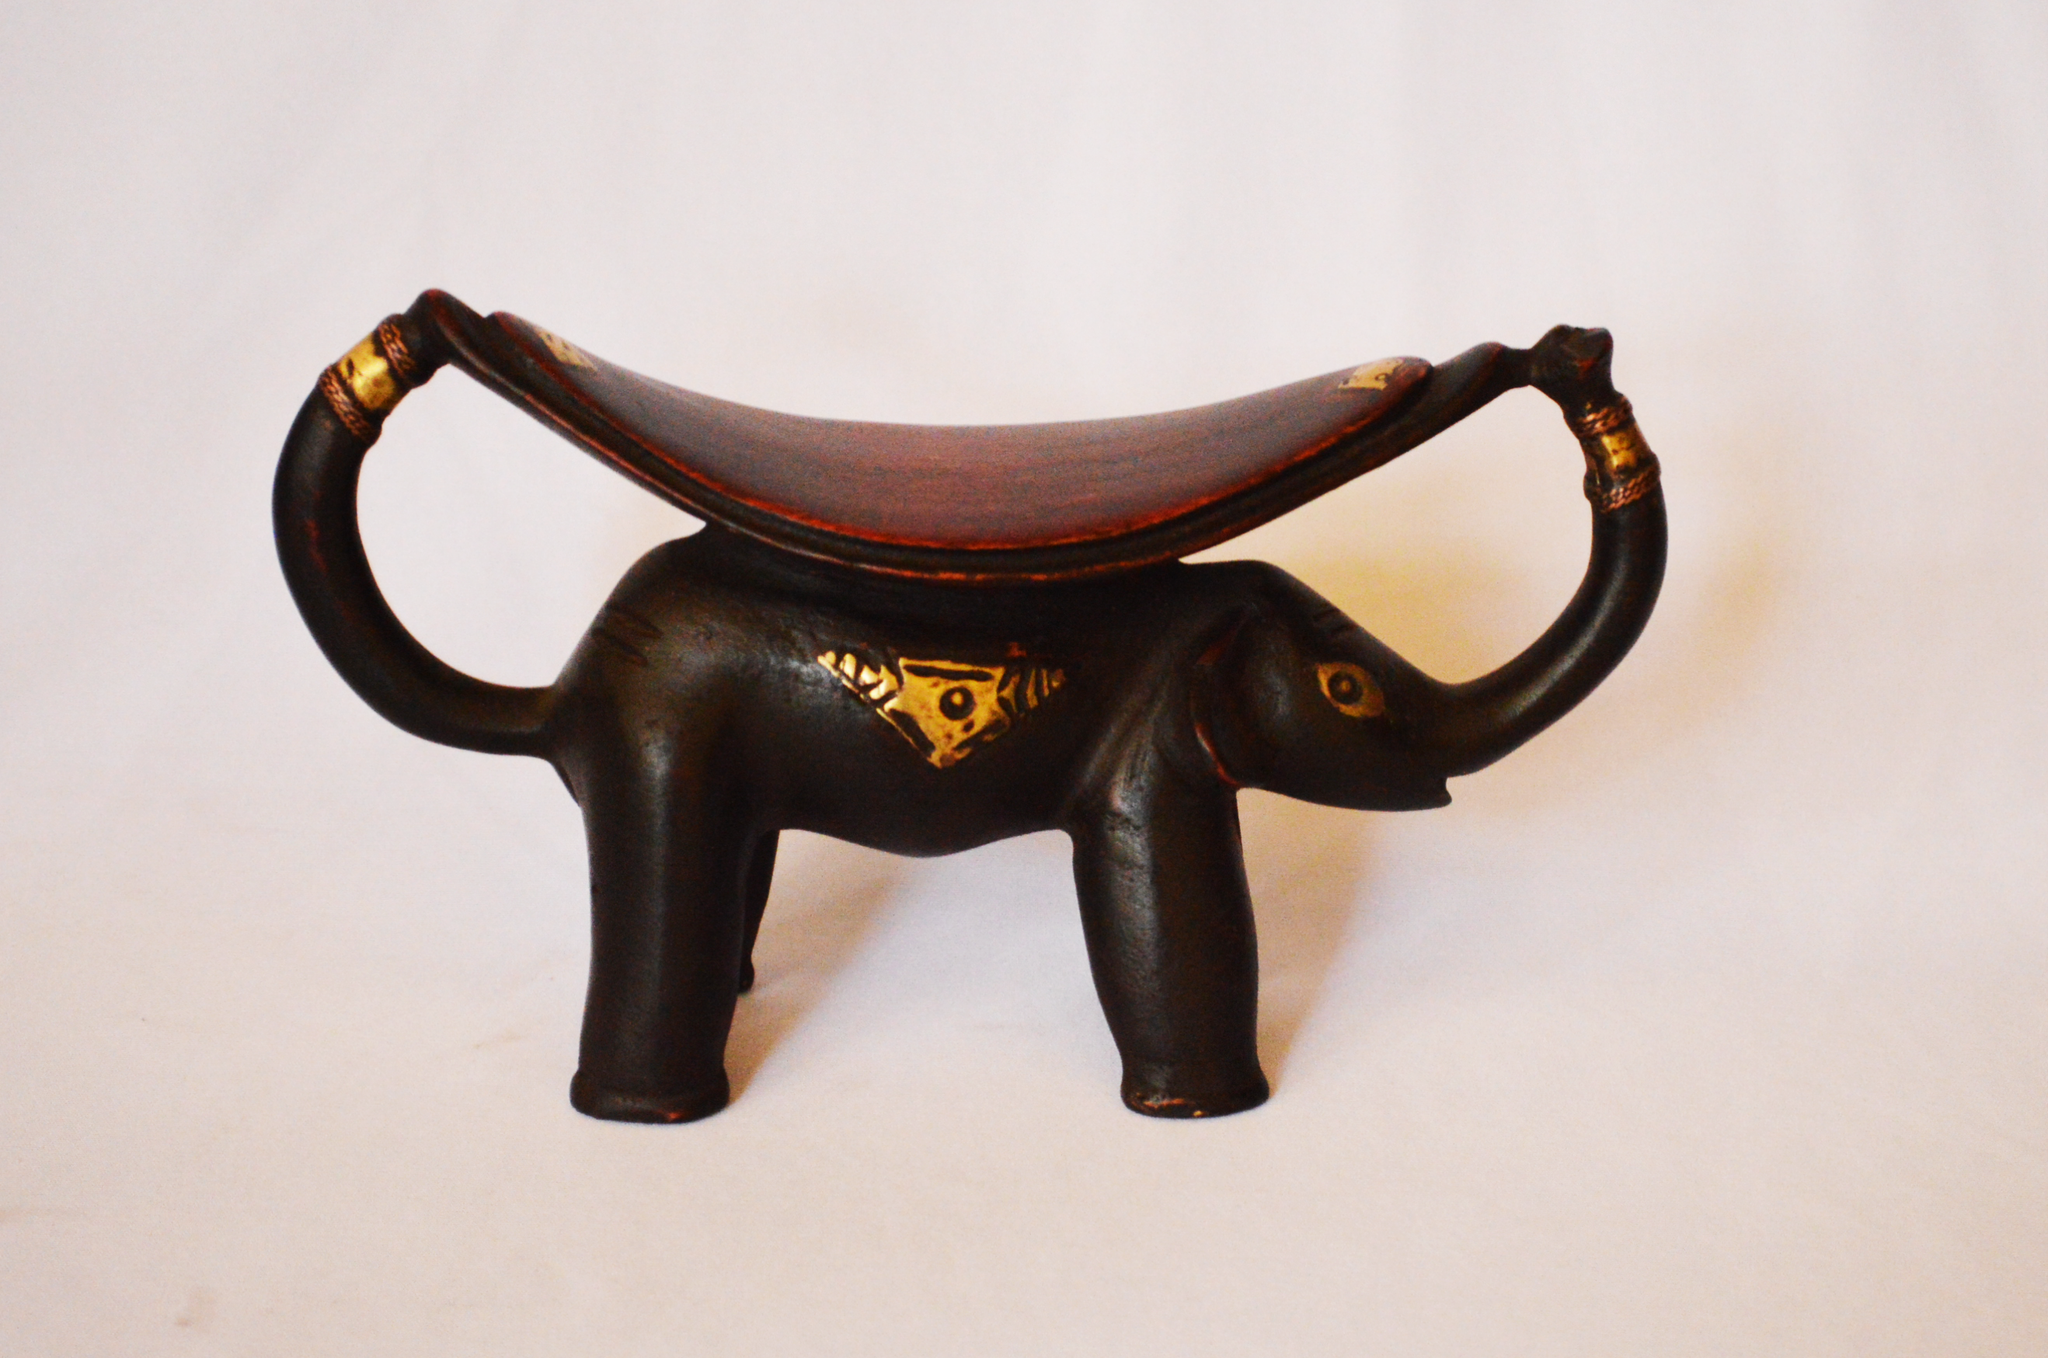 Dinka elephant headrest - Authentic African handicrafts | Clothing, bags, painting, toys & more - CULTURE HUB by Muthoni Unchained